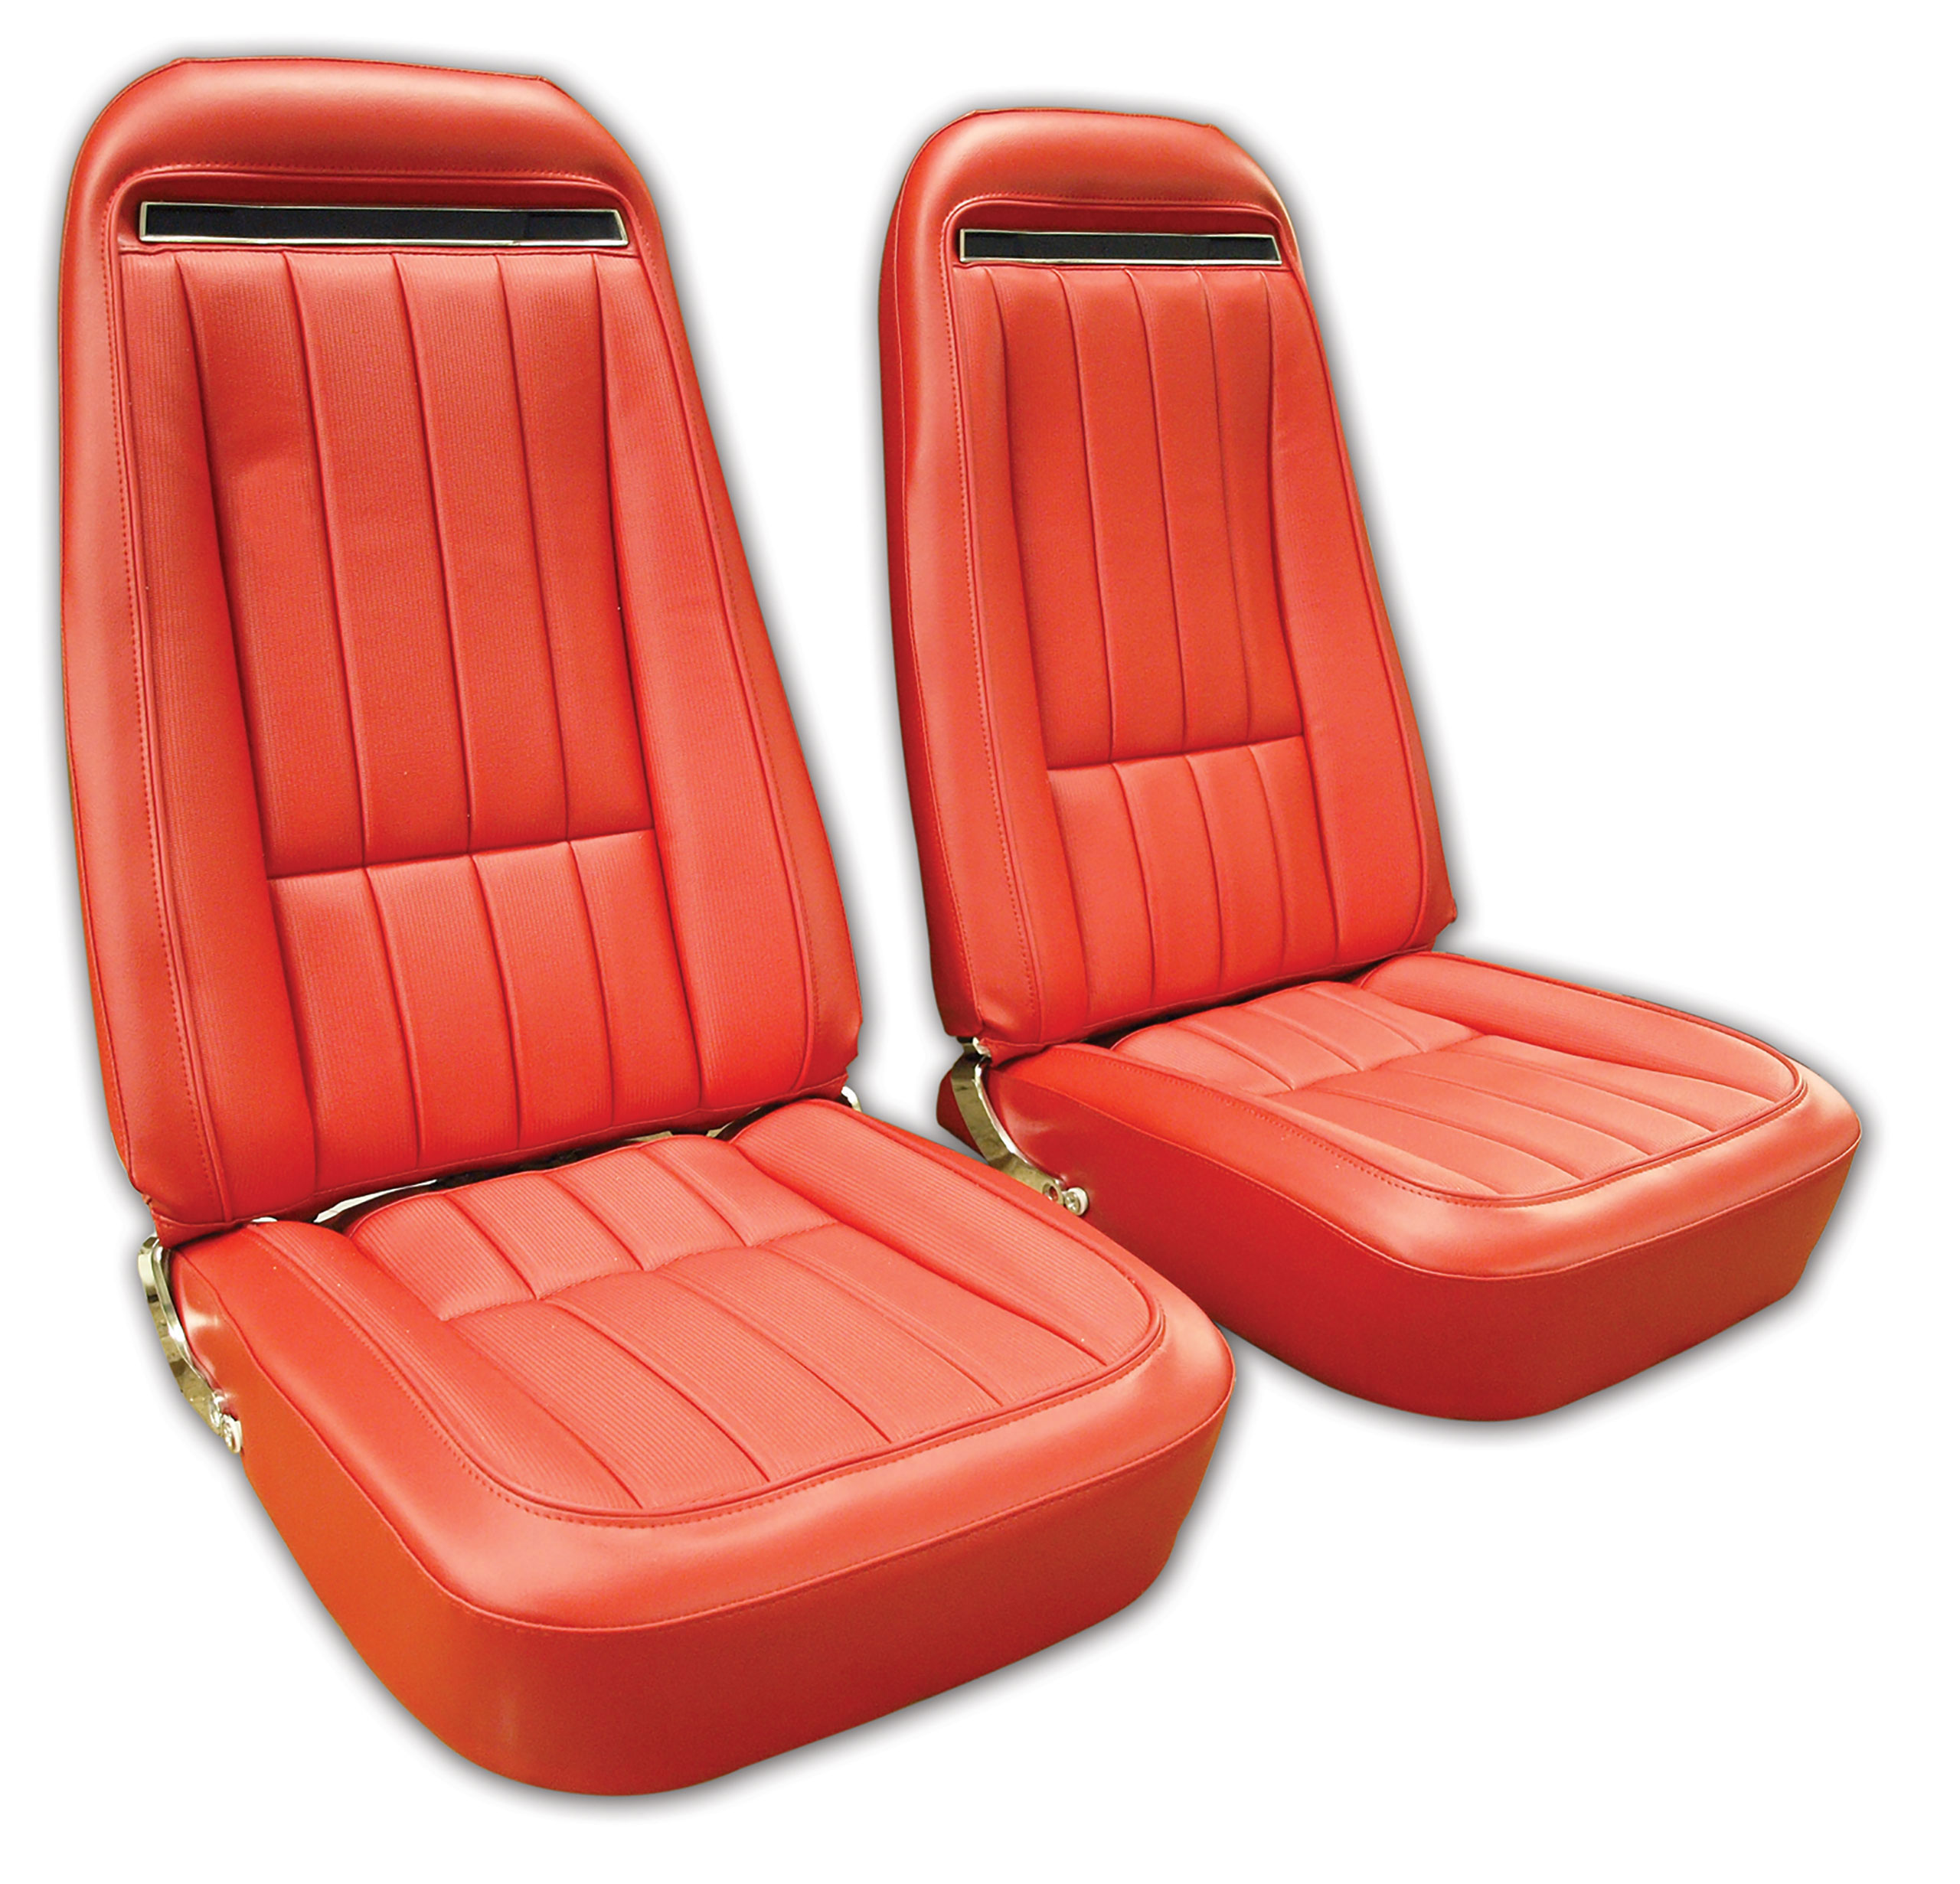 1970-1971 C3 Corvette Mounted Seats Red "Leather-Like" Vinyl With Shoulder Harness